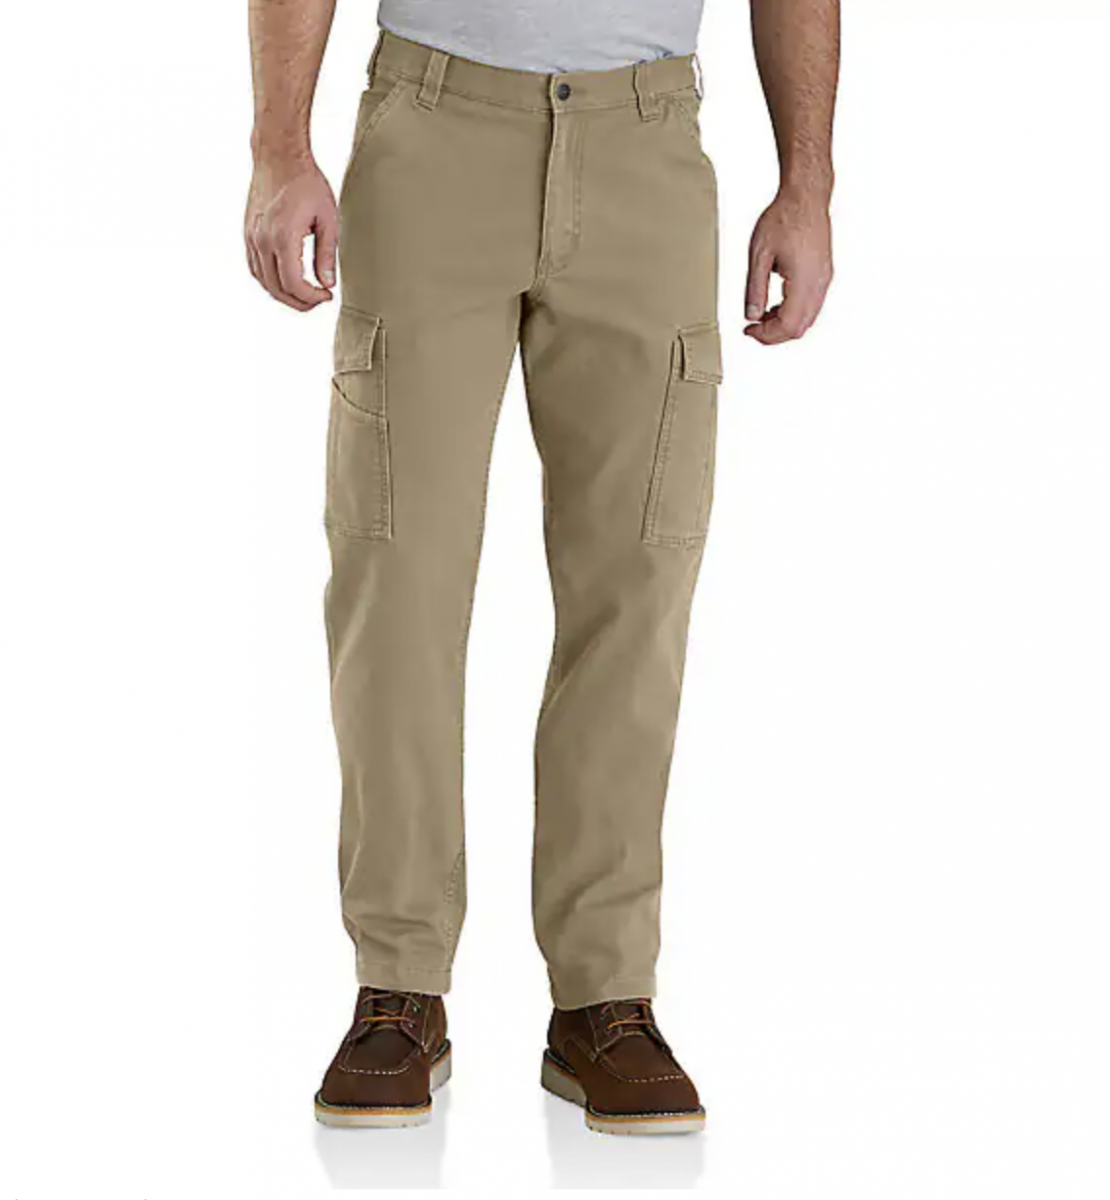 Save on Carhartt work pants for work or for fashion with our Carhartt promo codes.